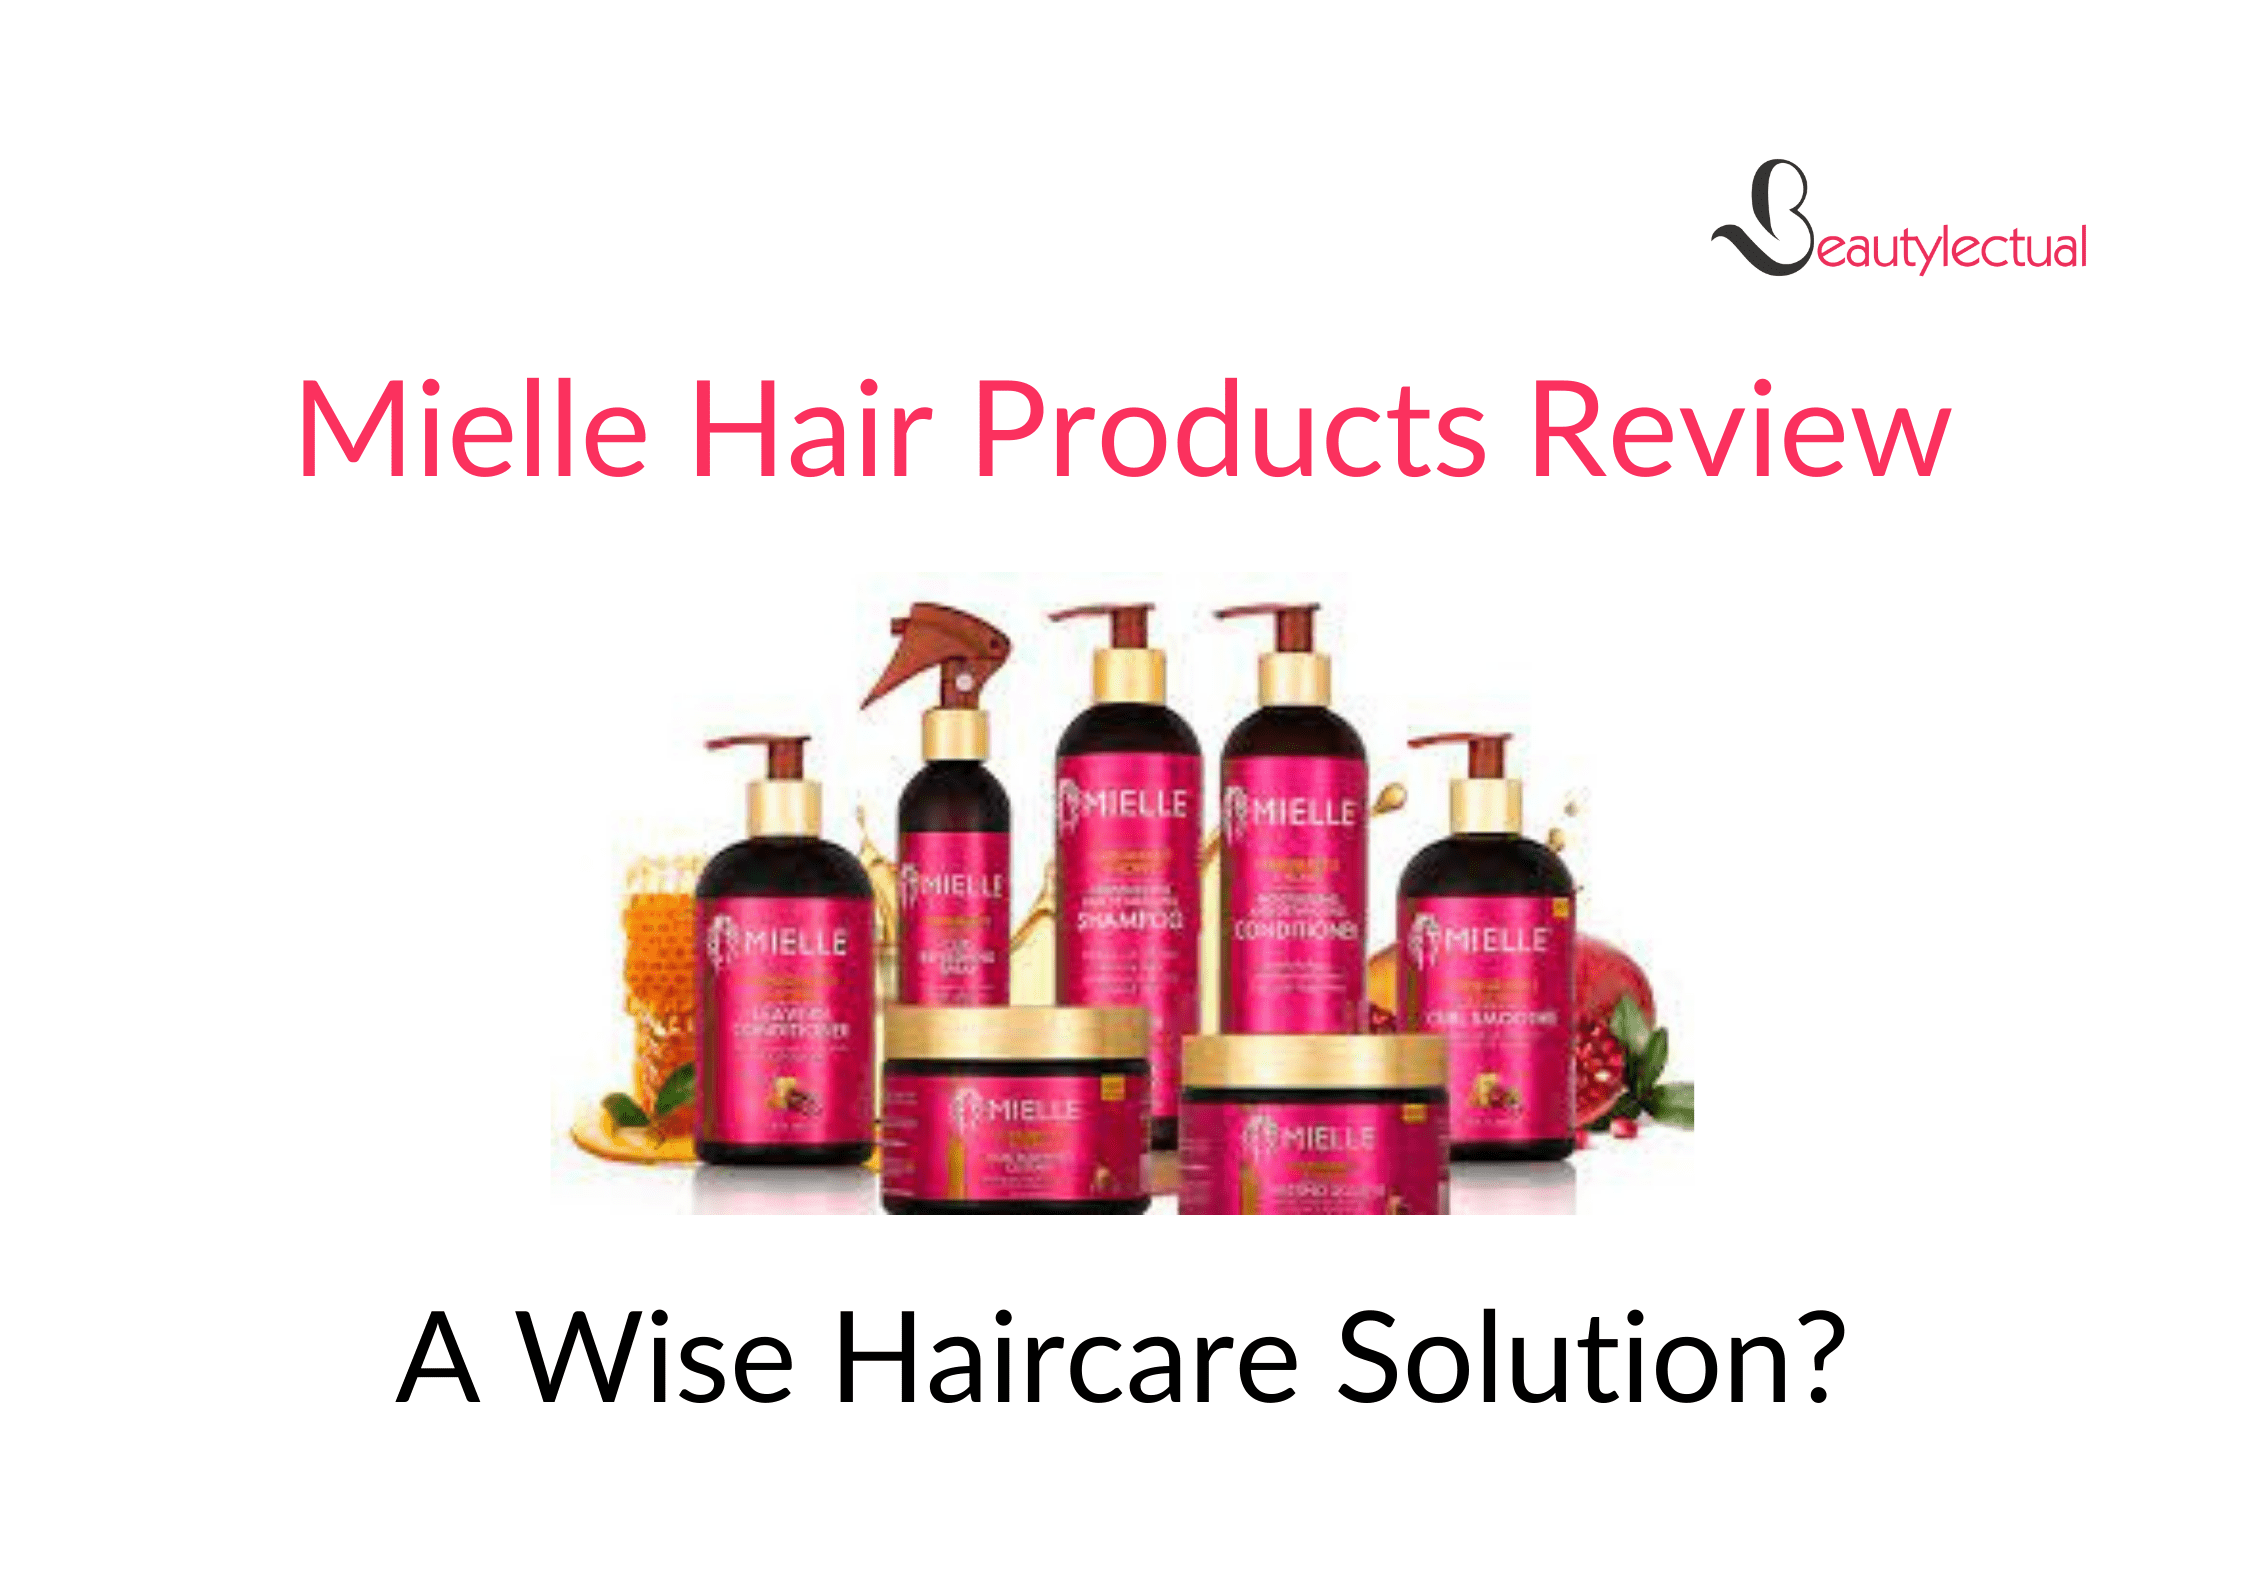 Mielle Hair Products Review